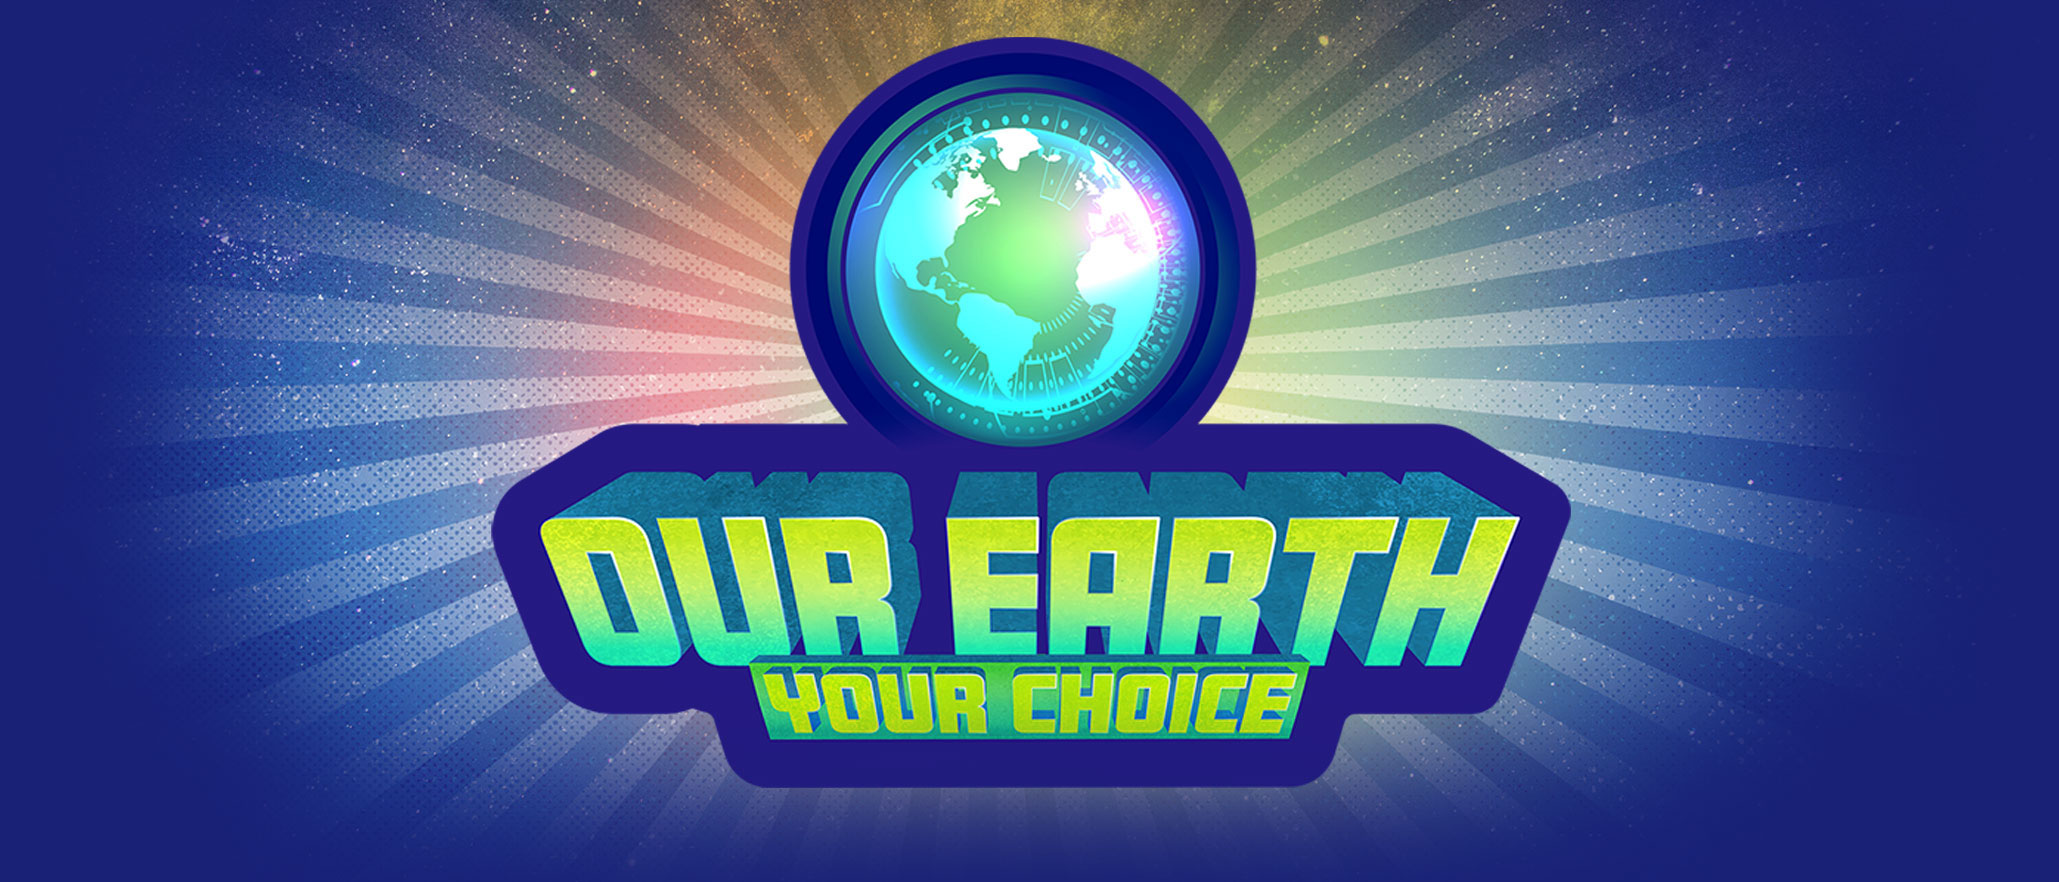 Our Earth Your Choice